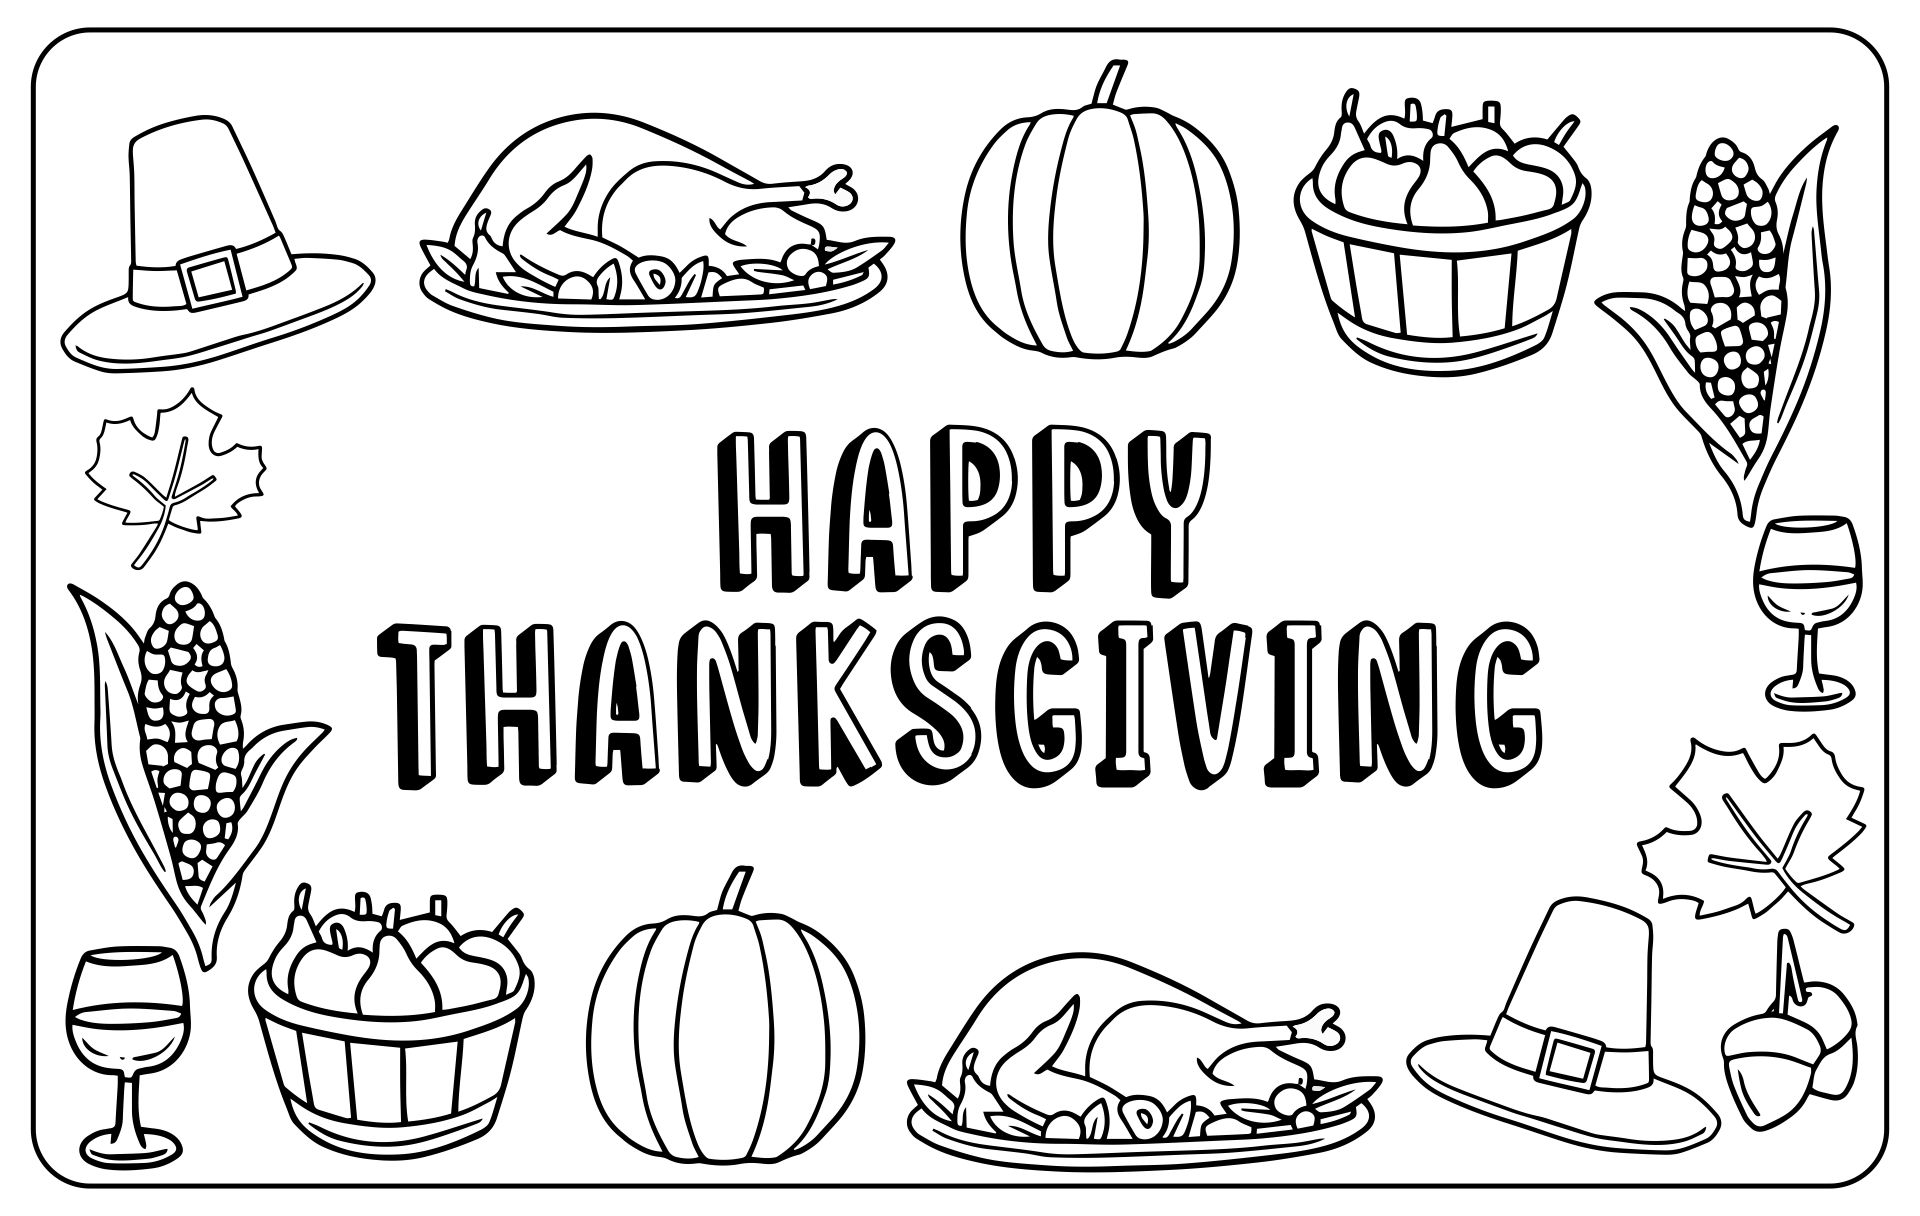 Printable Thanksgiving Placemats For Kids